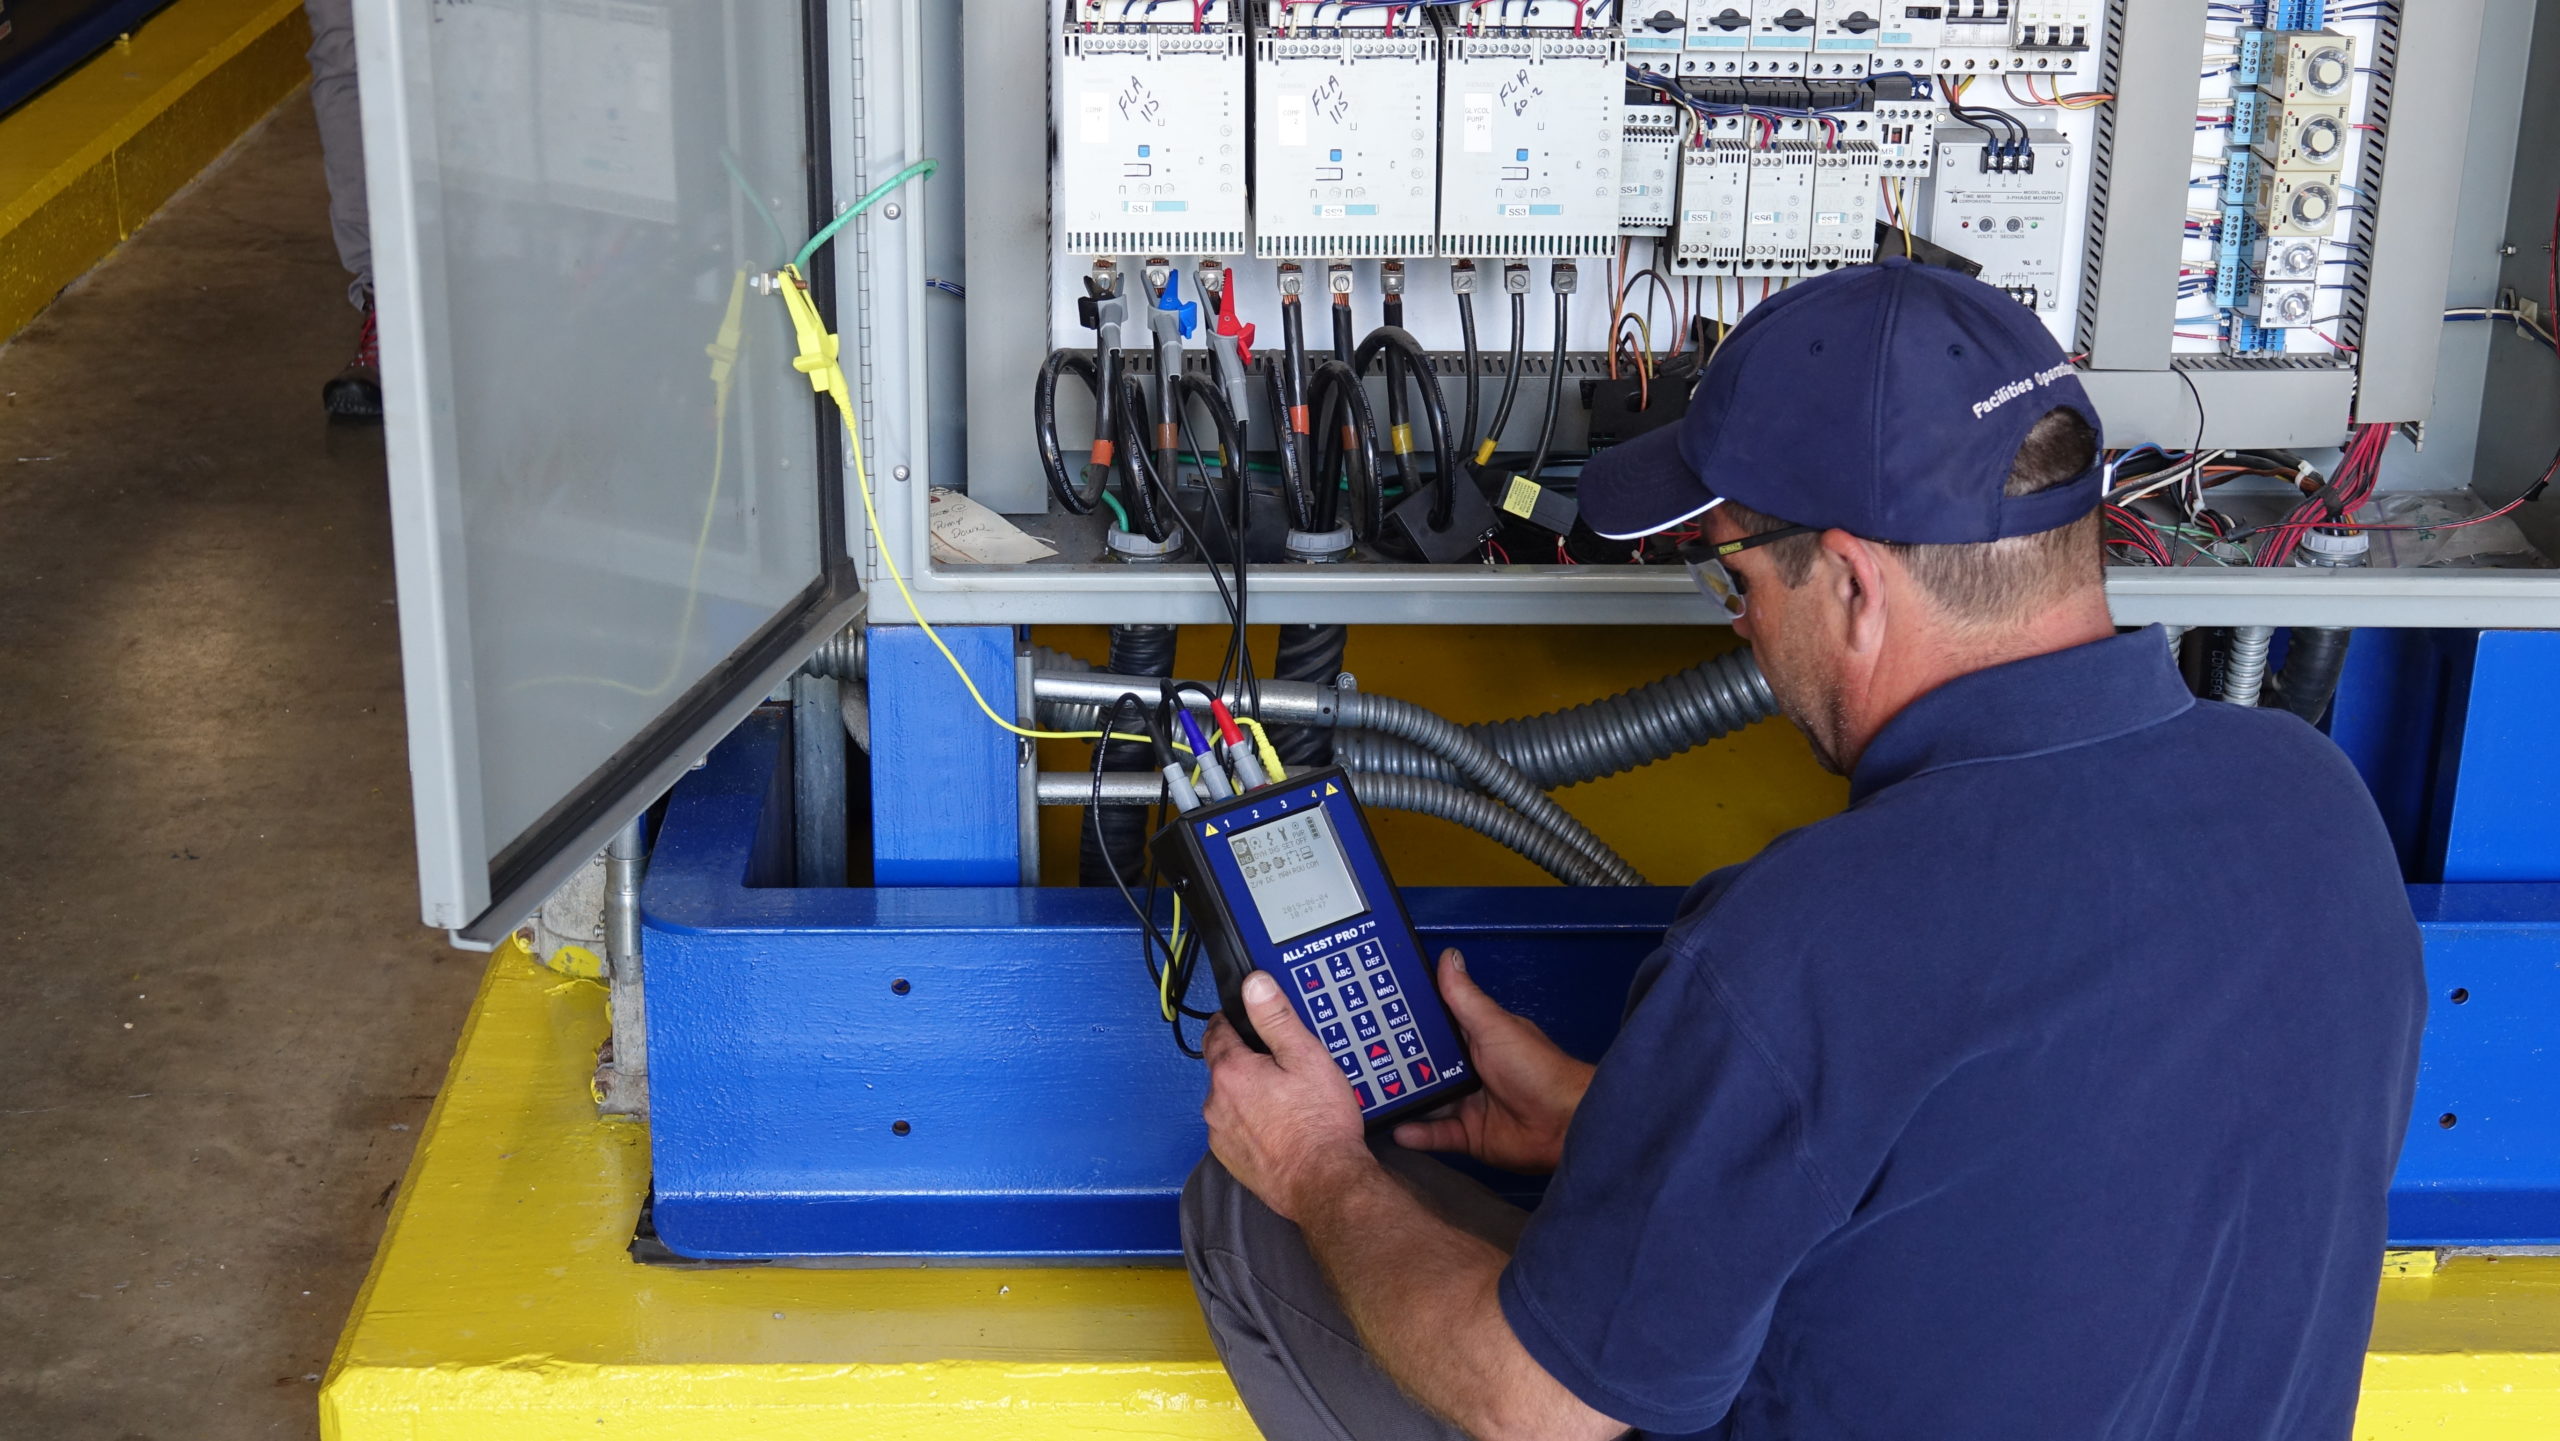 Condition monitoring tools used on motor control panel.